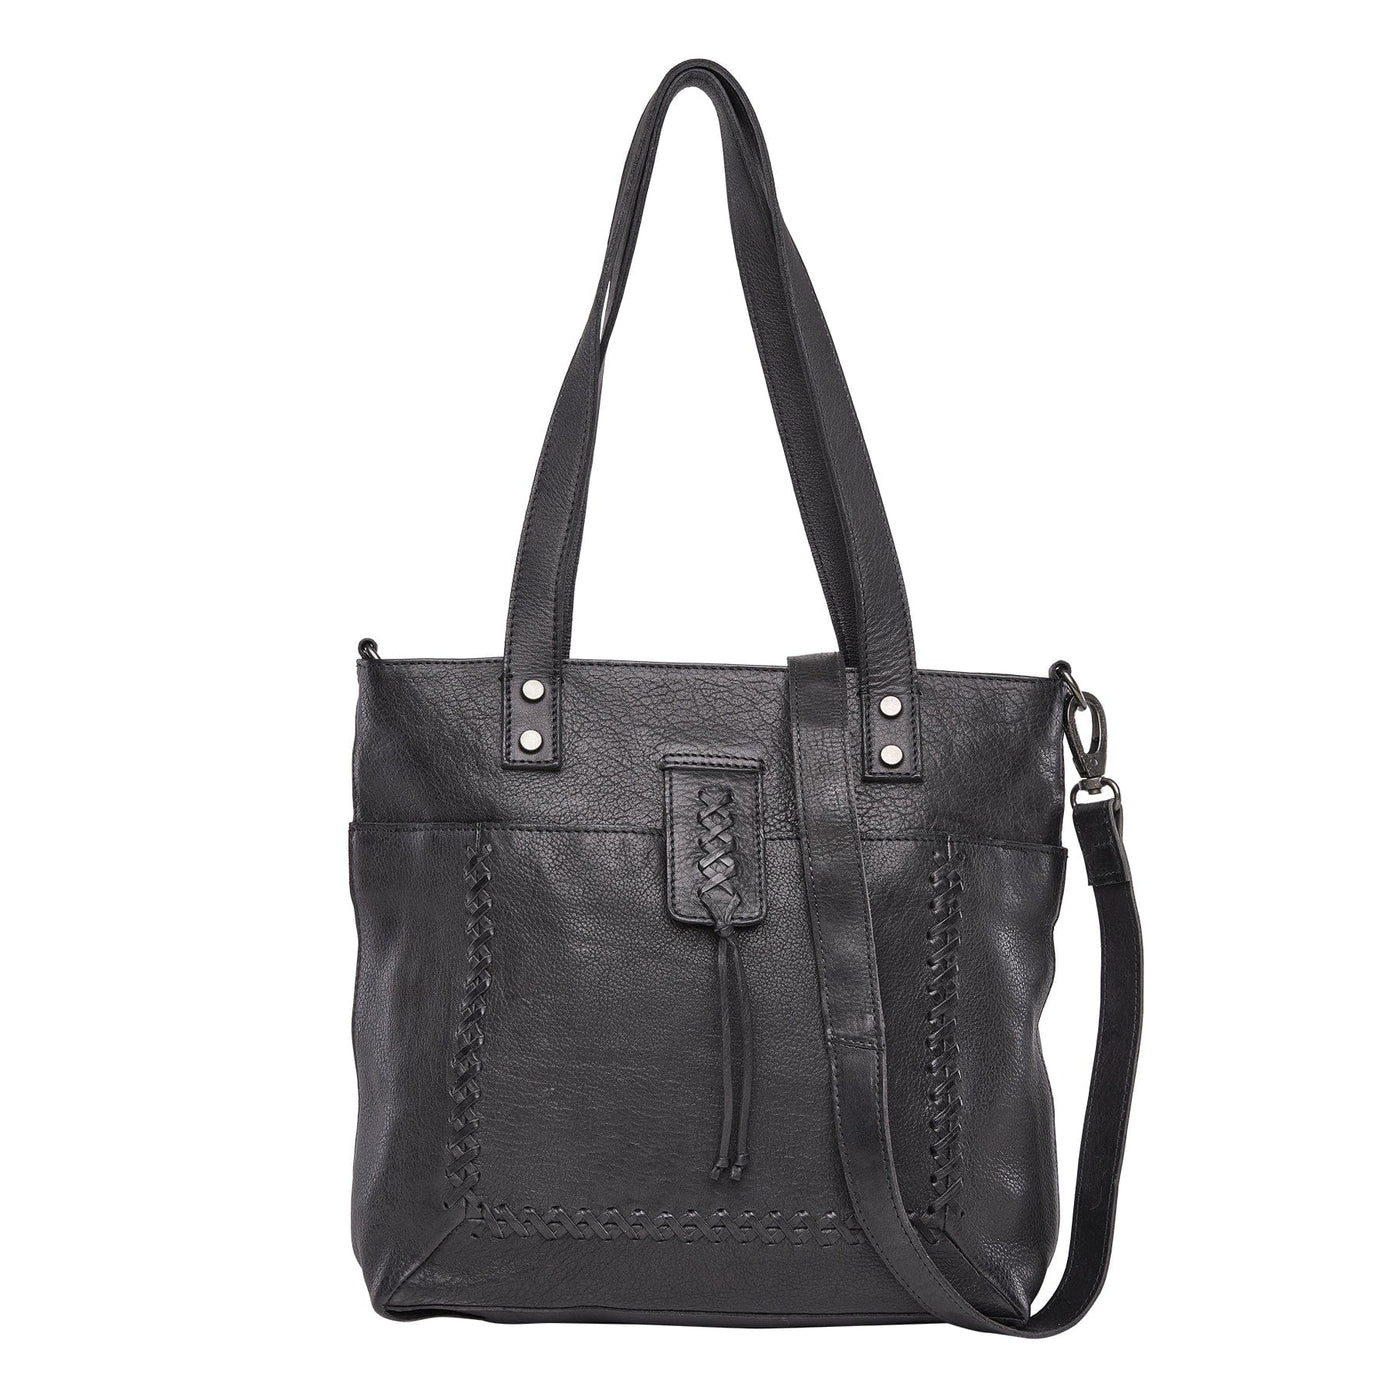 Amelia Crossbody Best for Small concealed Carry Pistol